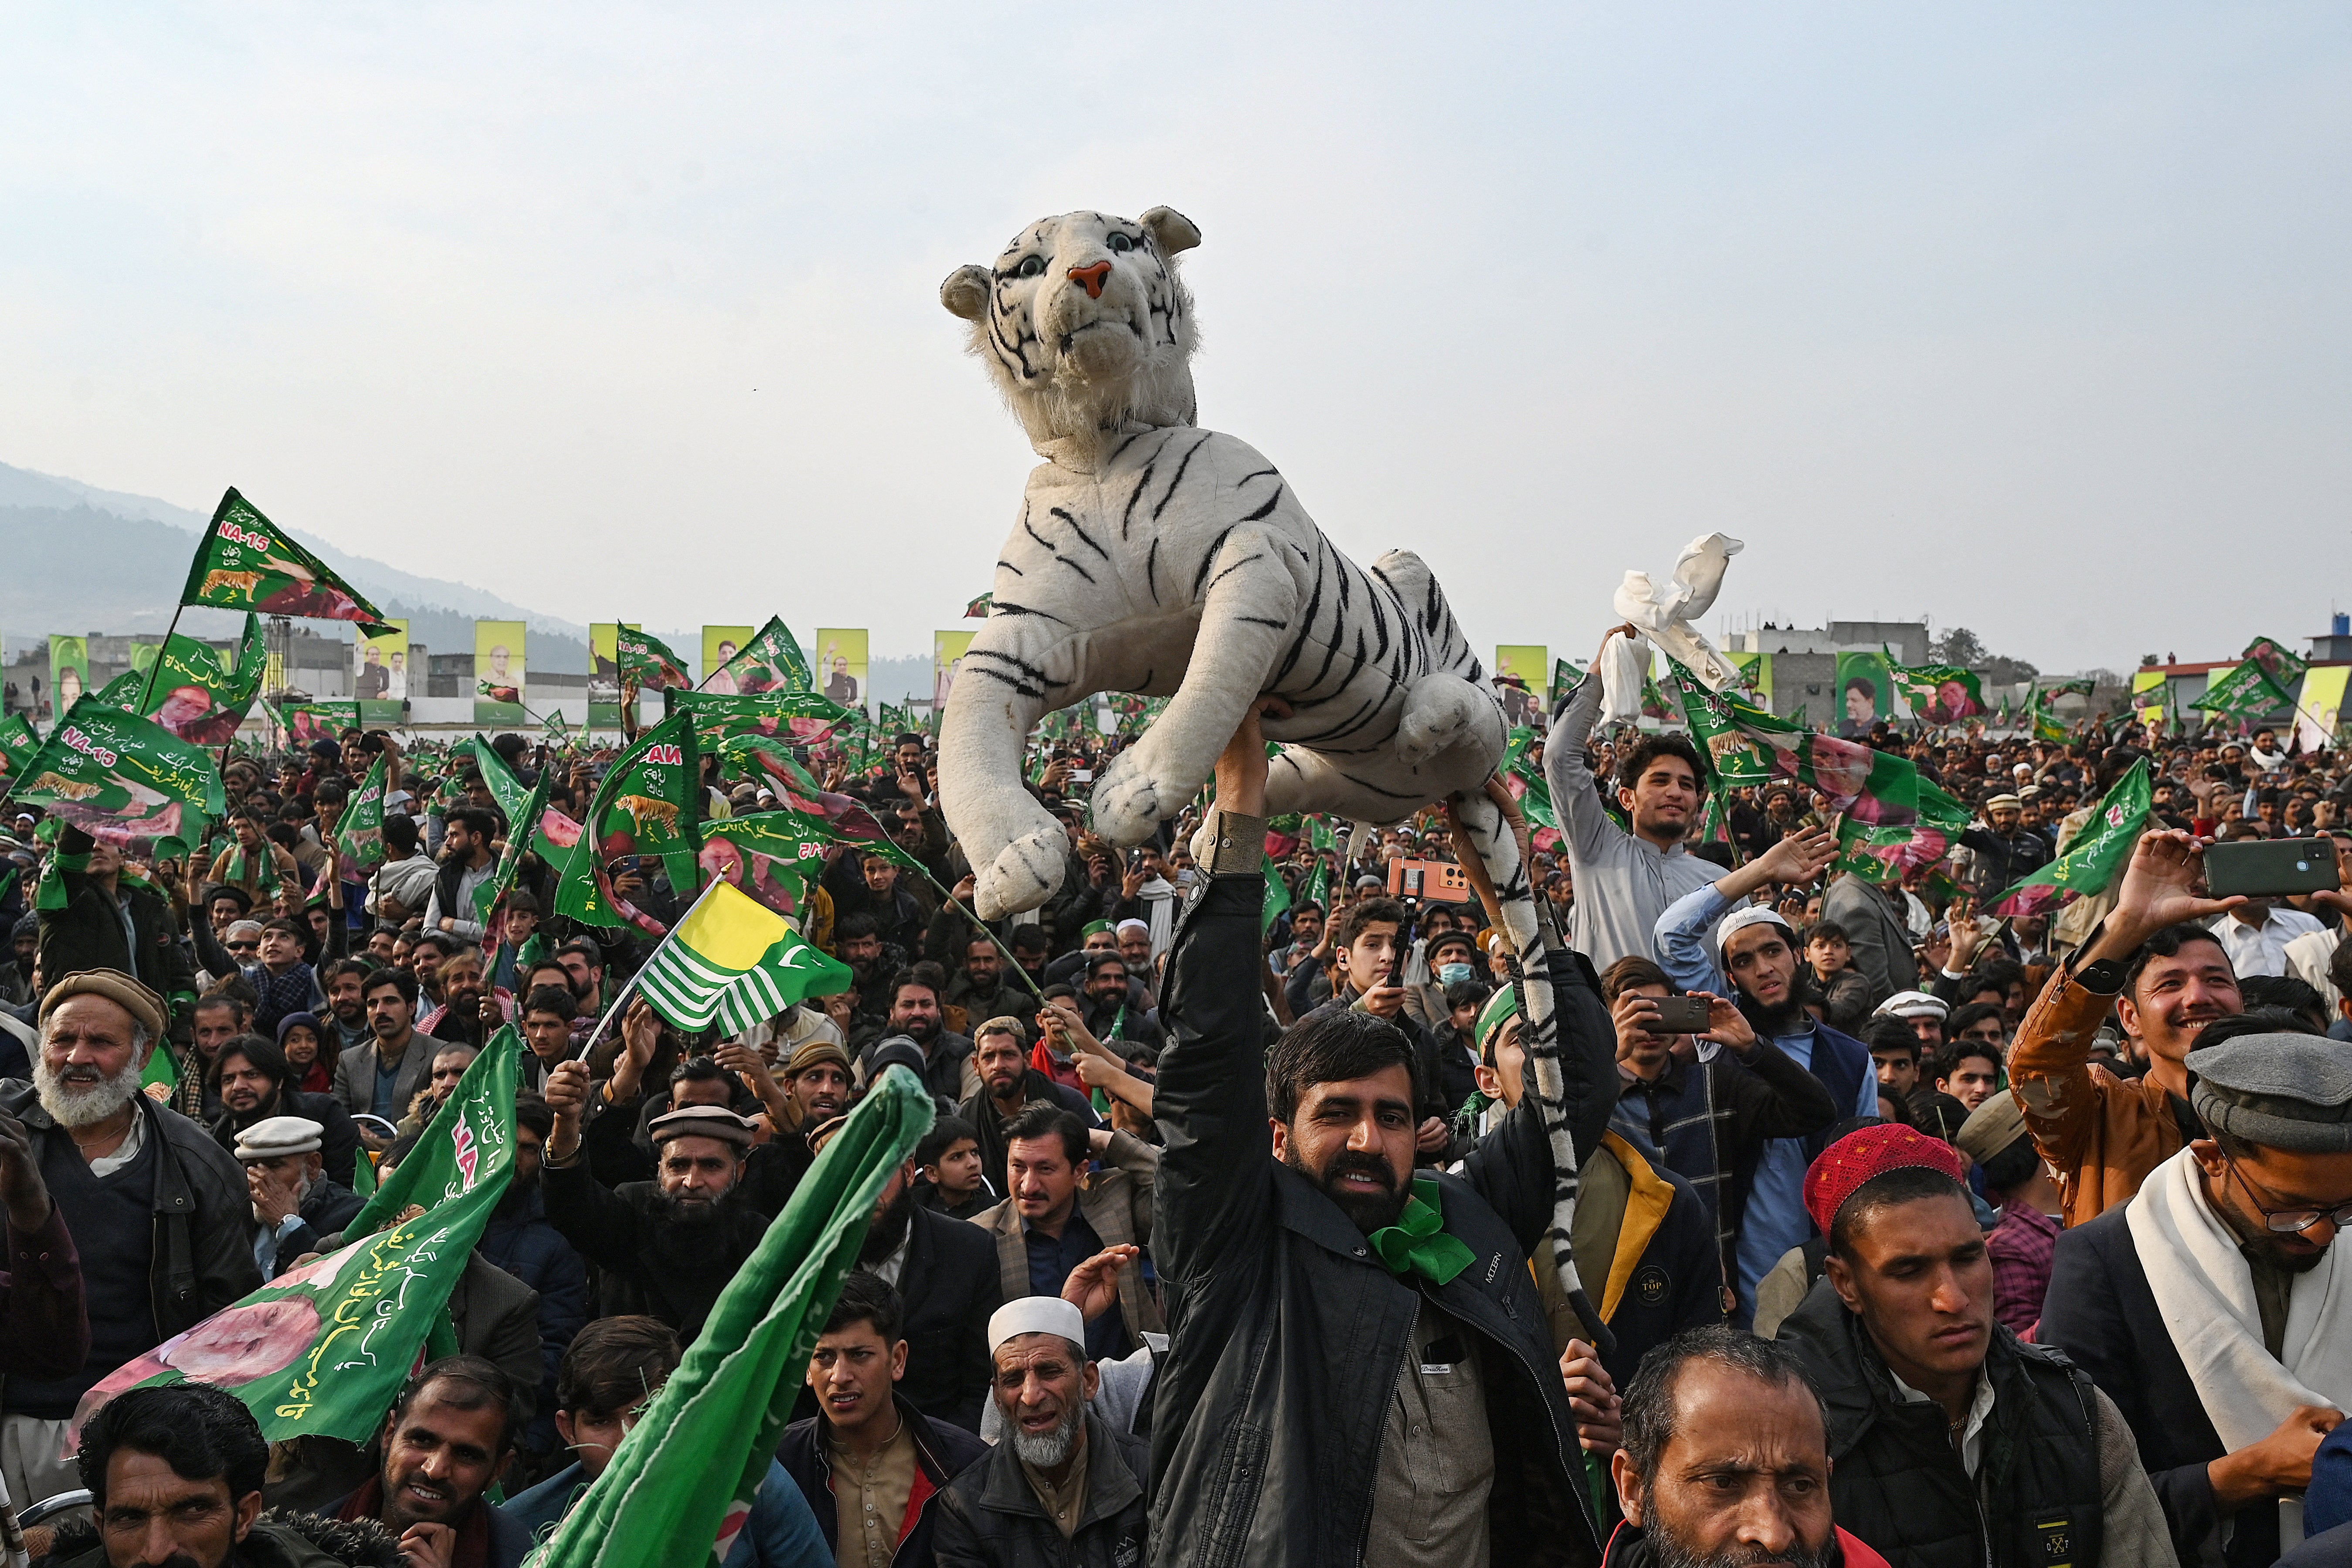 Pakistan Muslim League – Nawaz (PML-N) supporters attend an election campaign rally for Nawaz Sharif at Mansehra, Khyber Pakhtunkhwa province